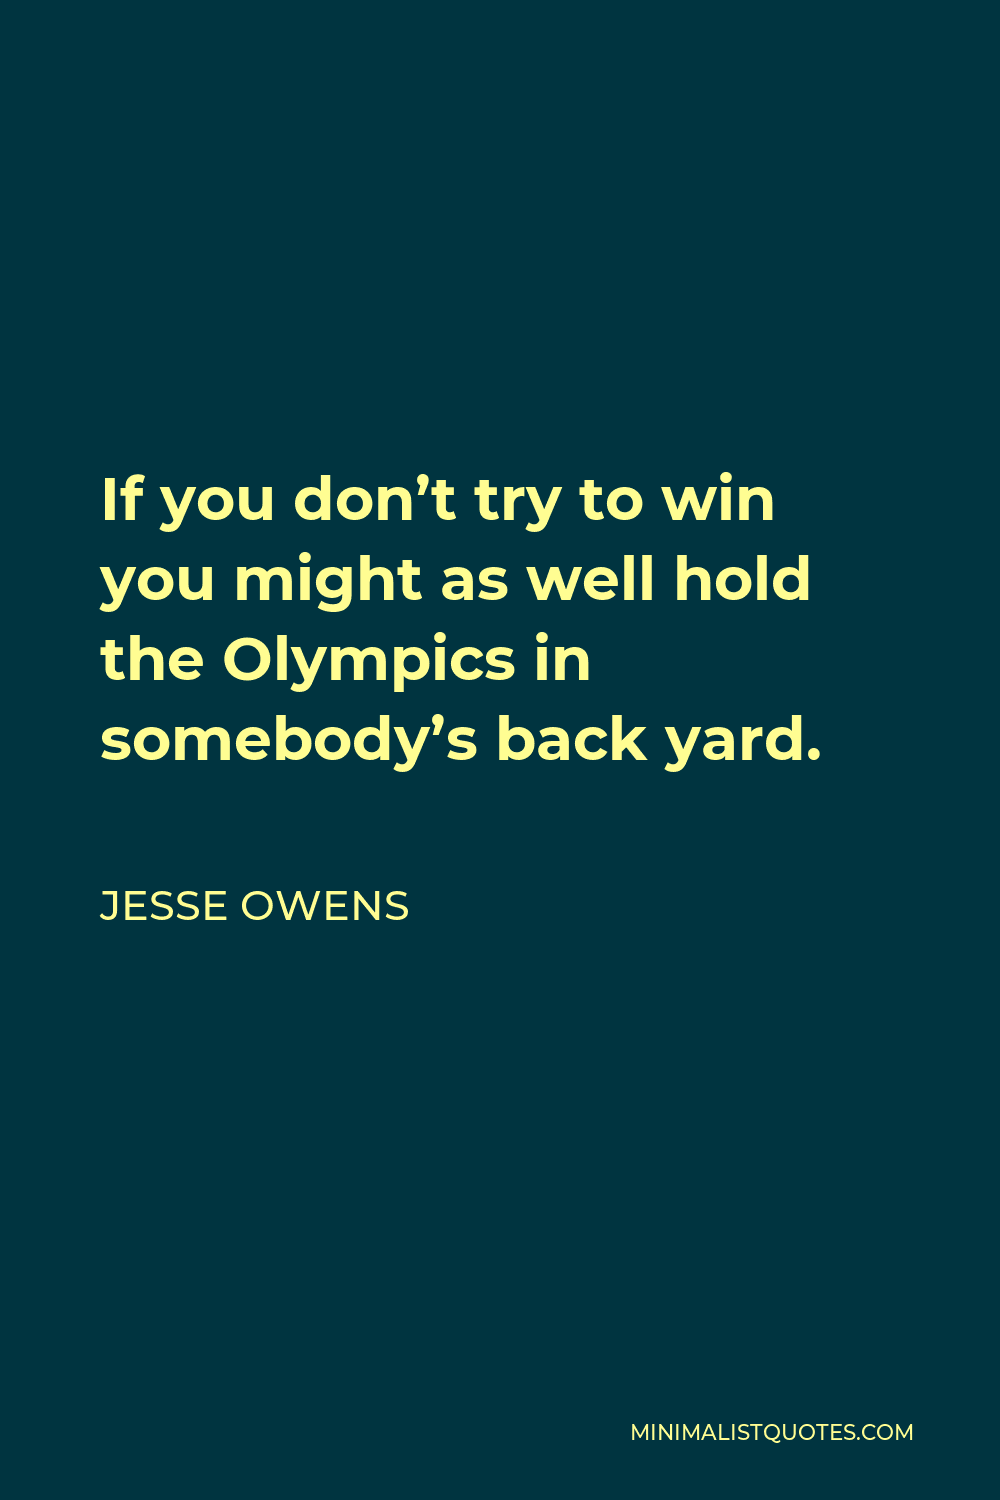 Jesse Owens Quote - If you don’t try to win you might as well hold the Olympics in somebody’s back yard.